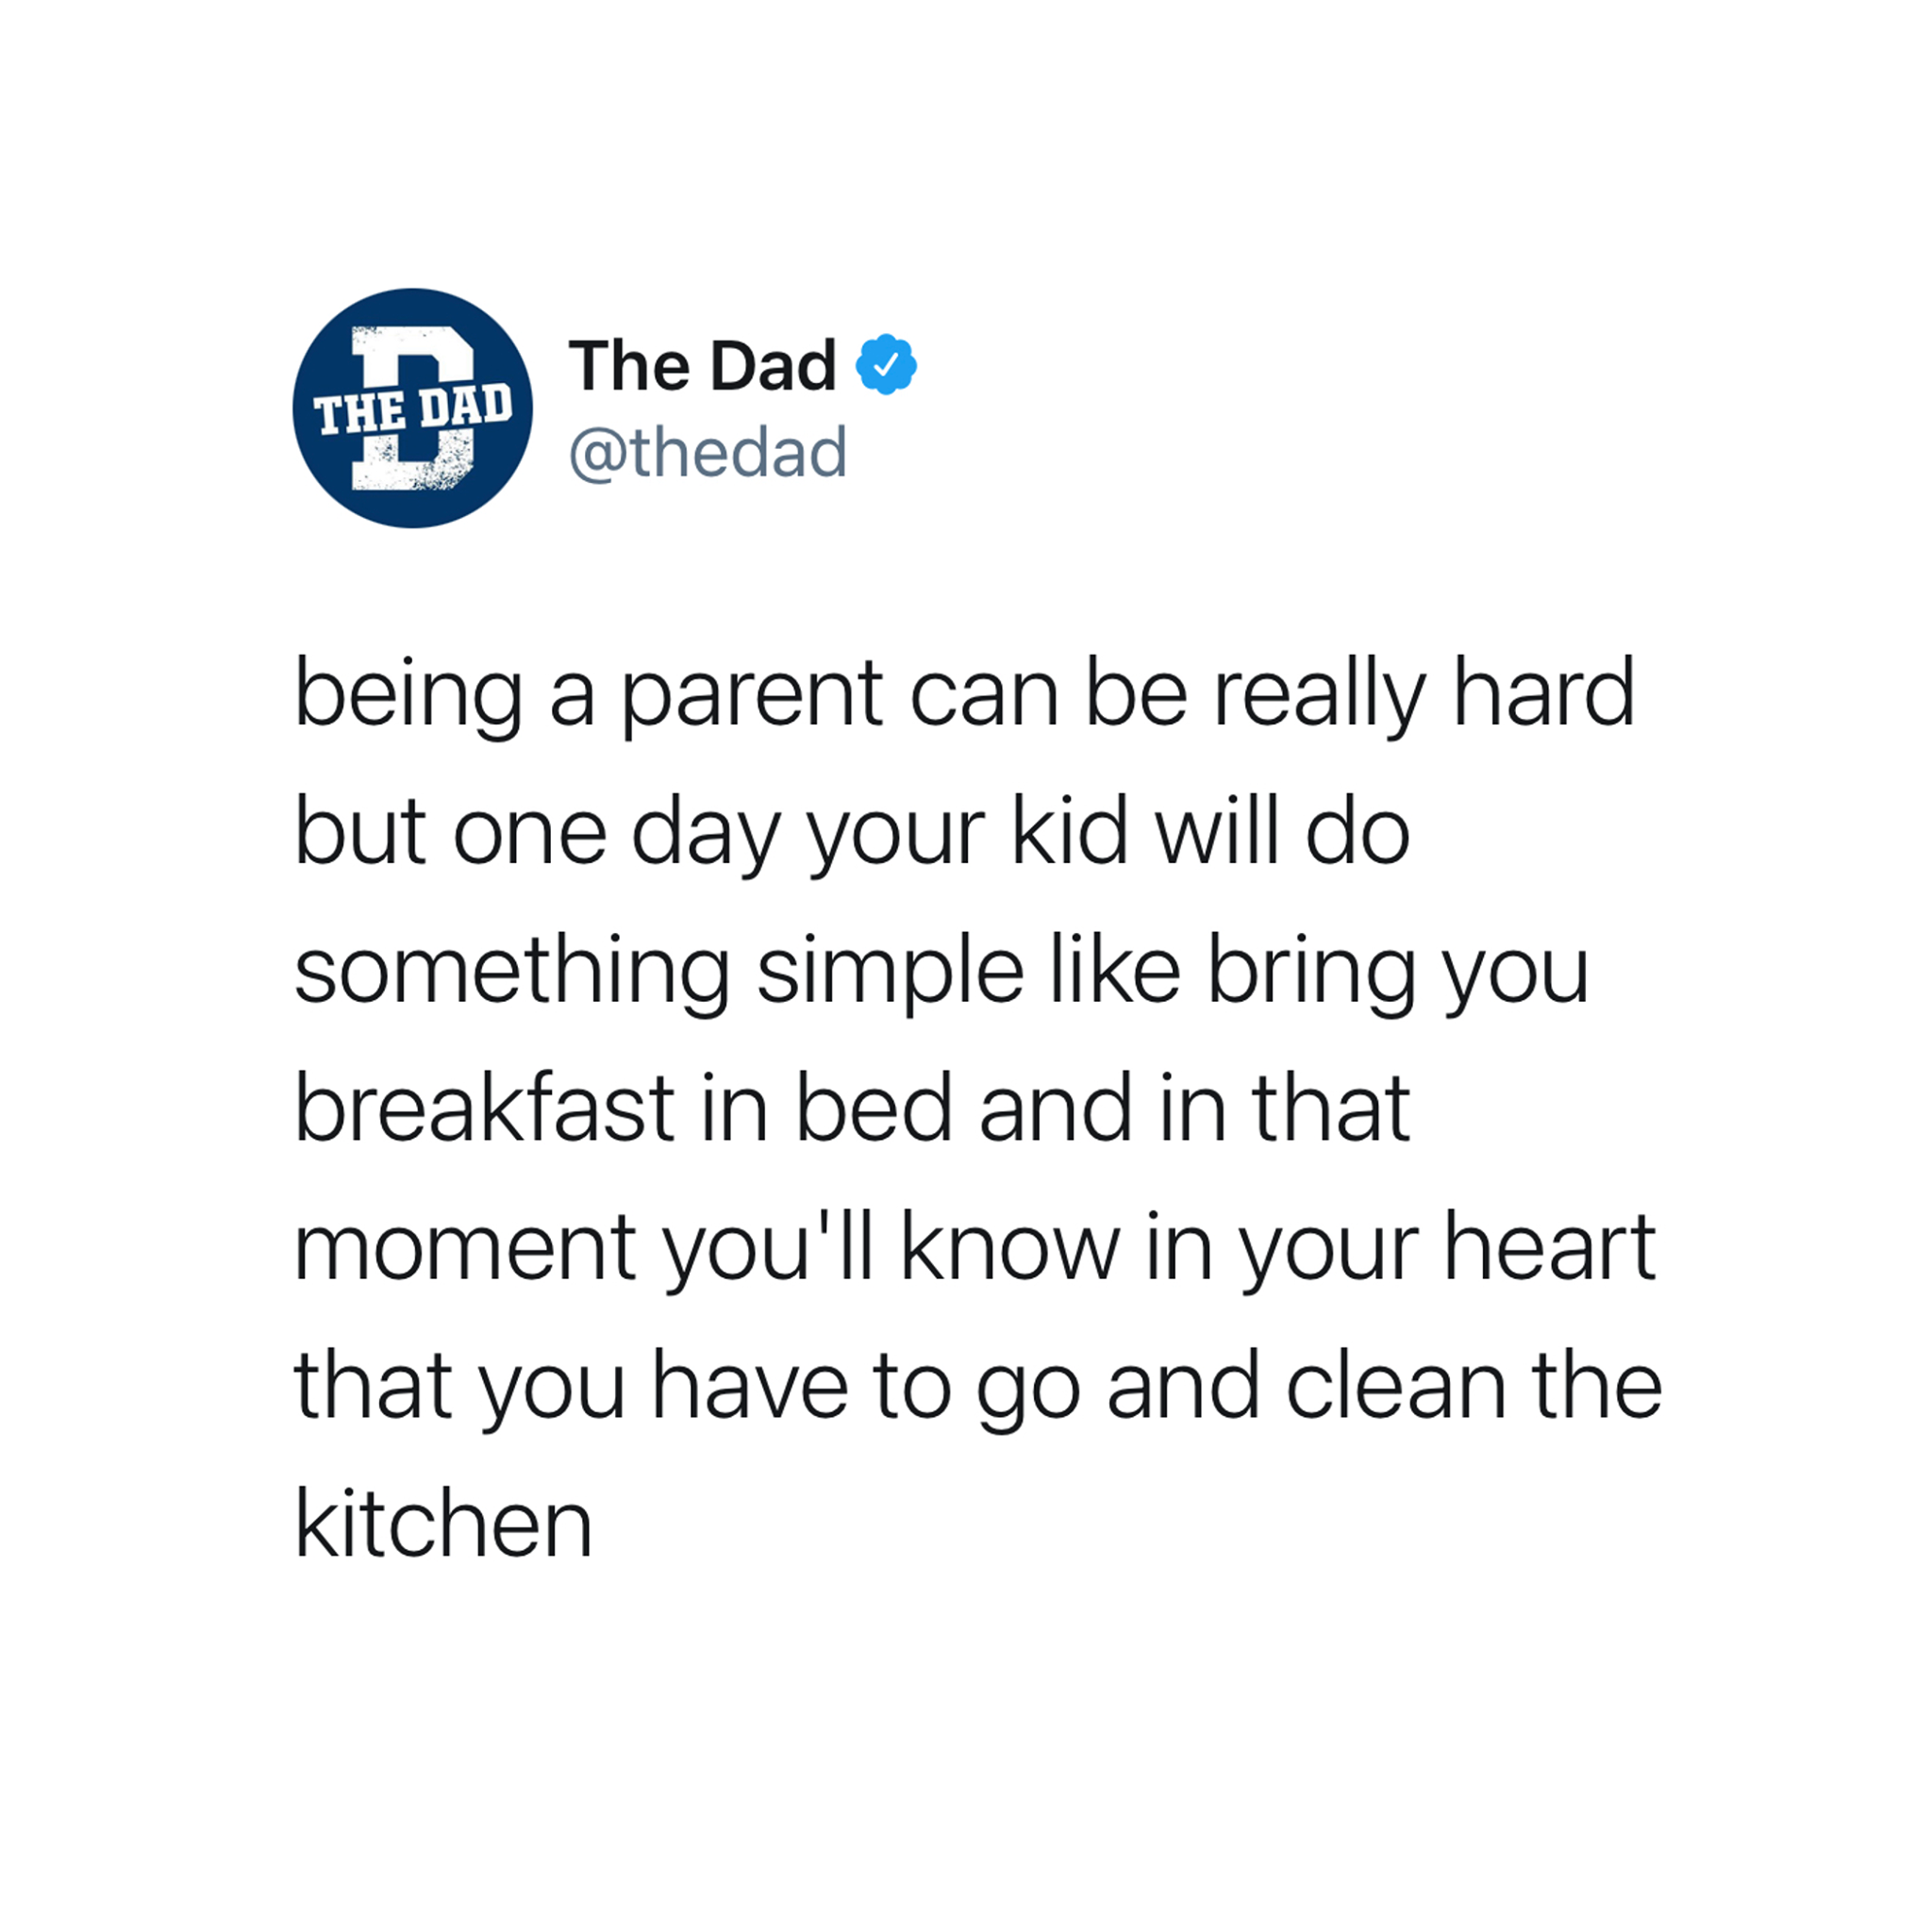 being a parent can be really hard but one day your kid will do something simple like bring you breakfast in bed, and in that moment you'll know in your heart that you have to go and clean the kitchen